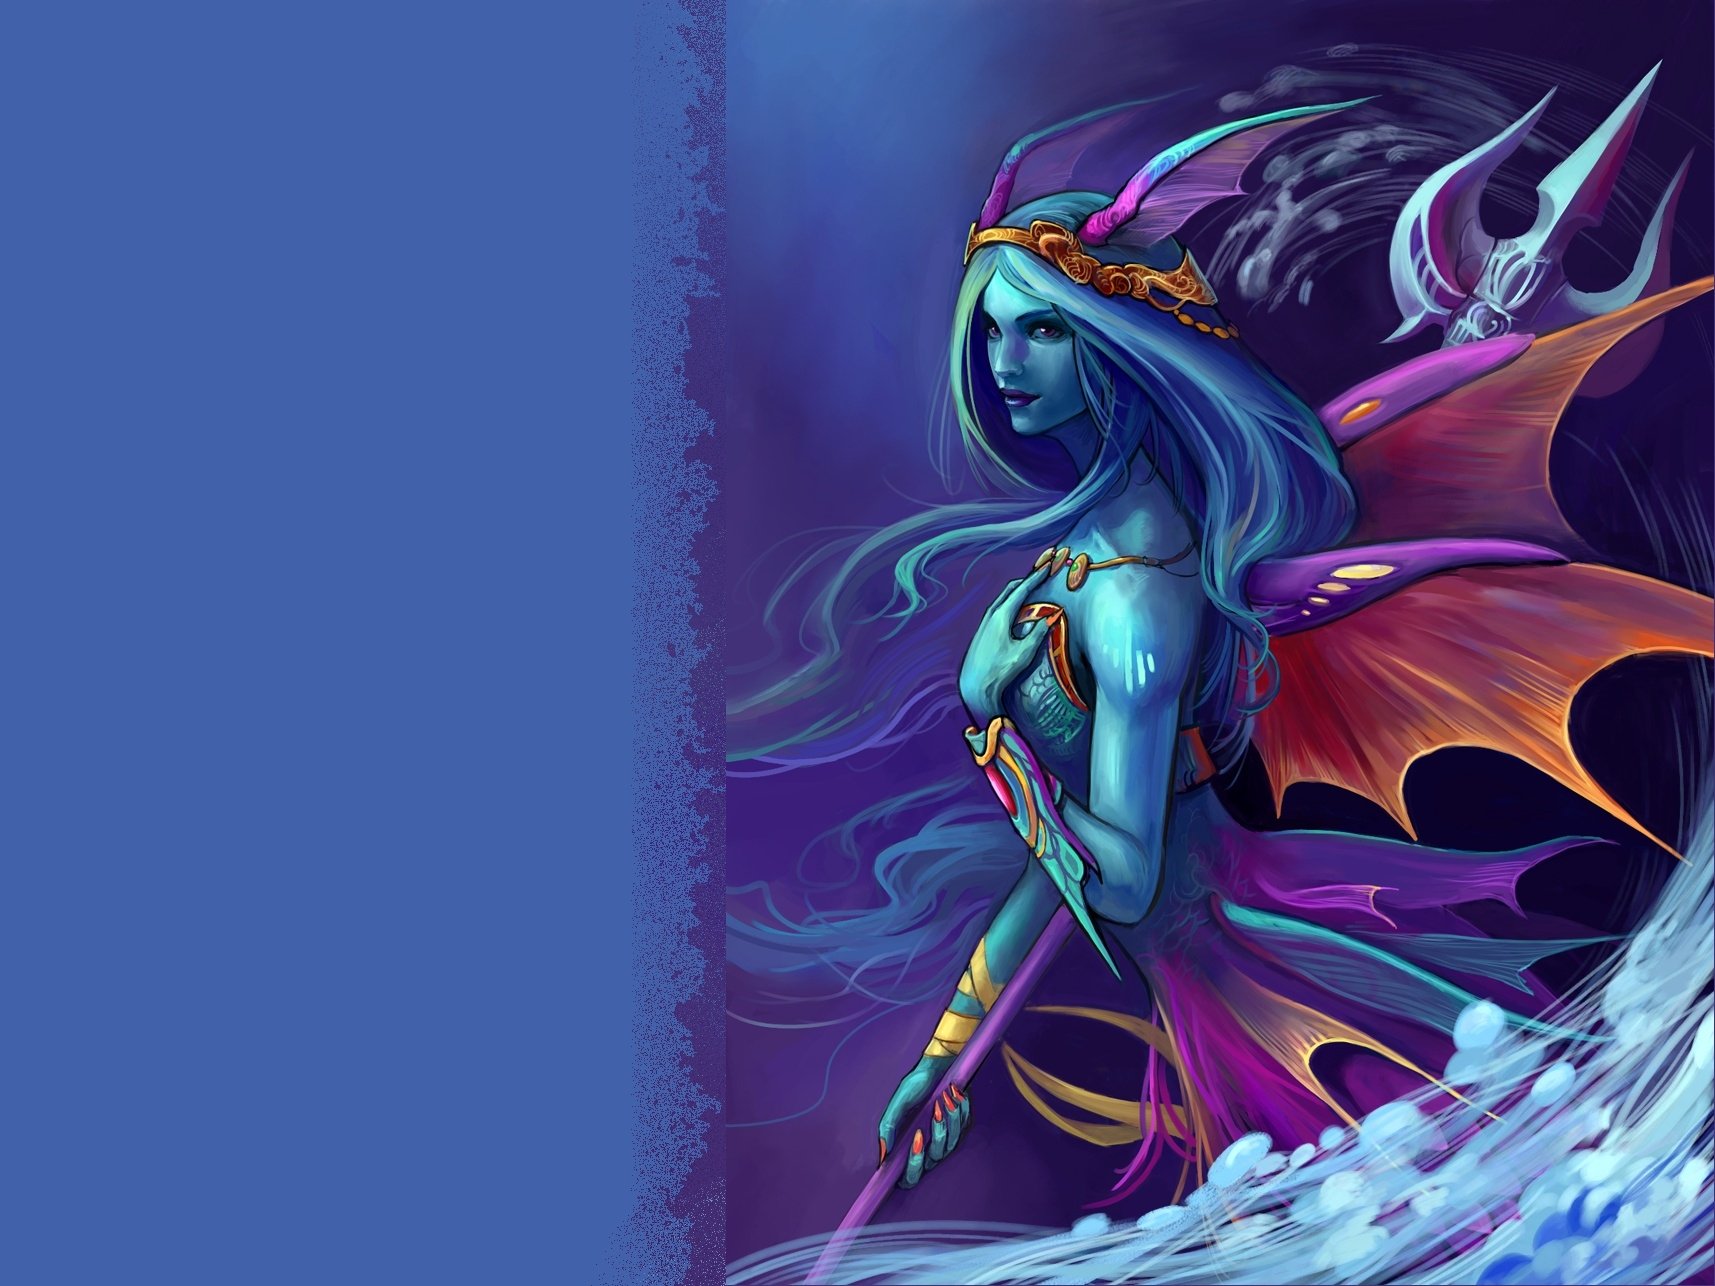 imagenes hd wallpaper,dragon,cg artwork,fictional character,mythical creature,graphic design